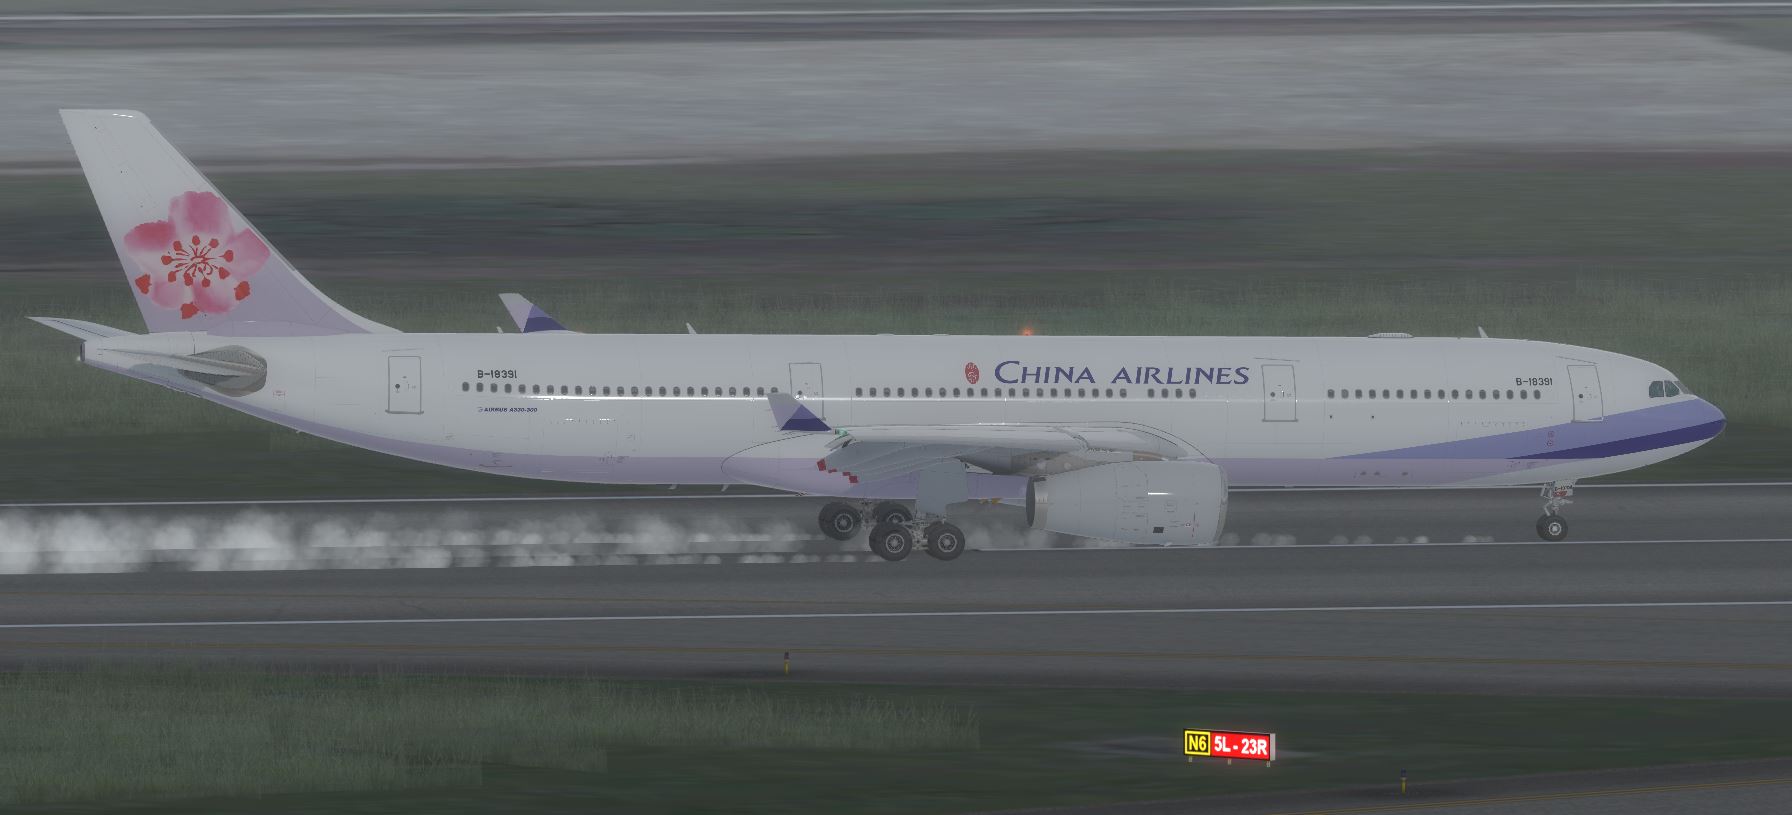 AS A330 ChinaAirline-7269 